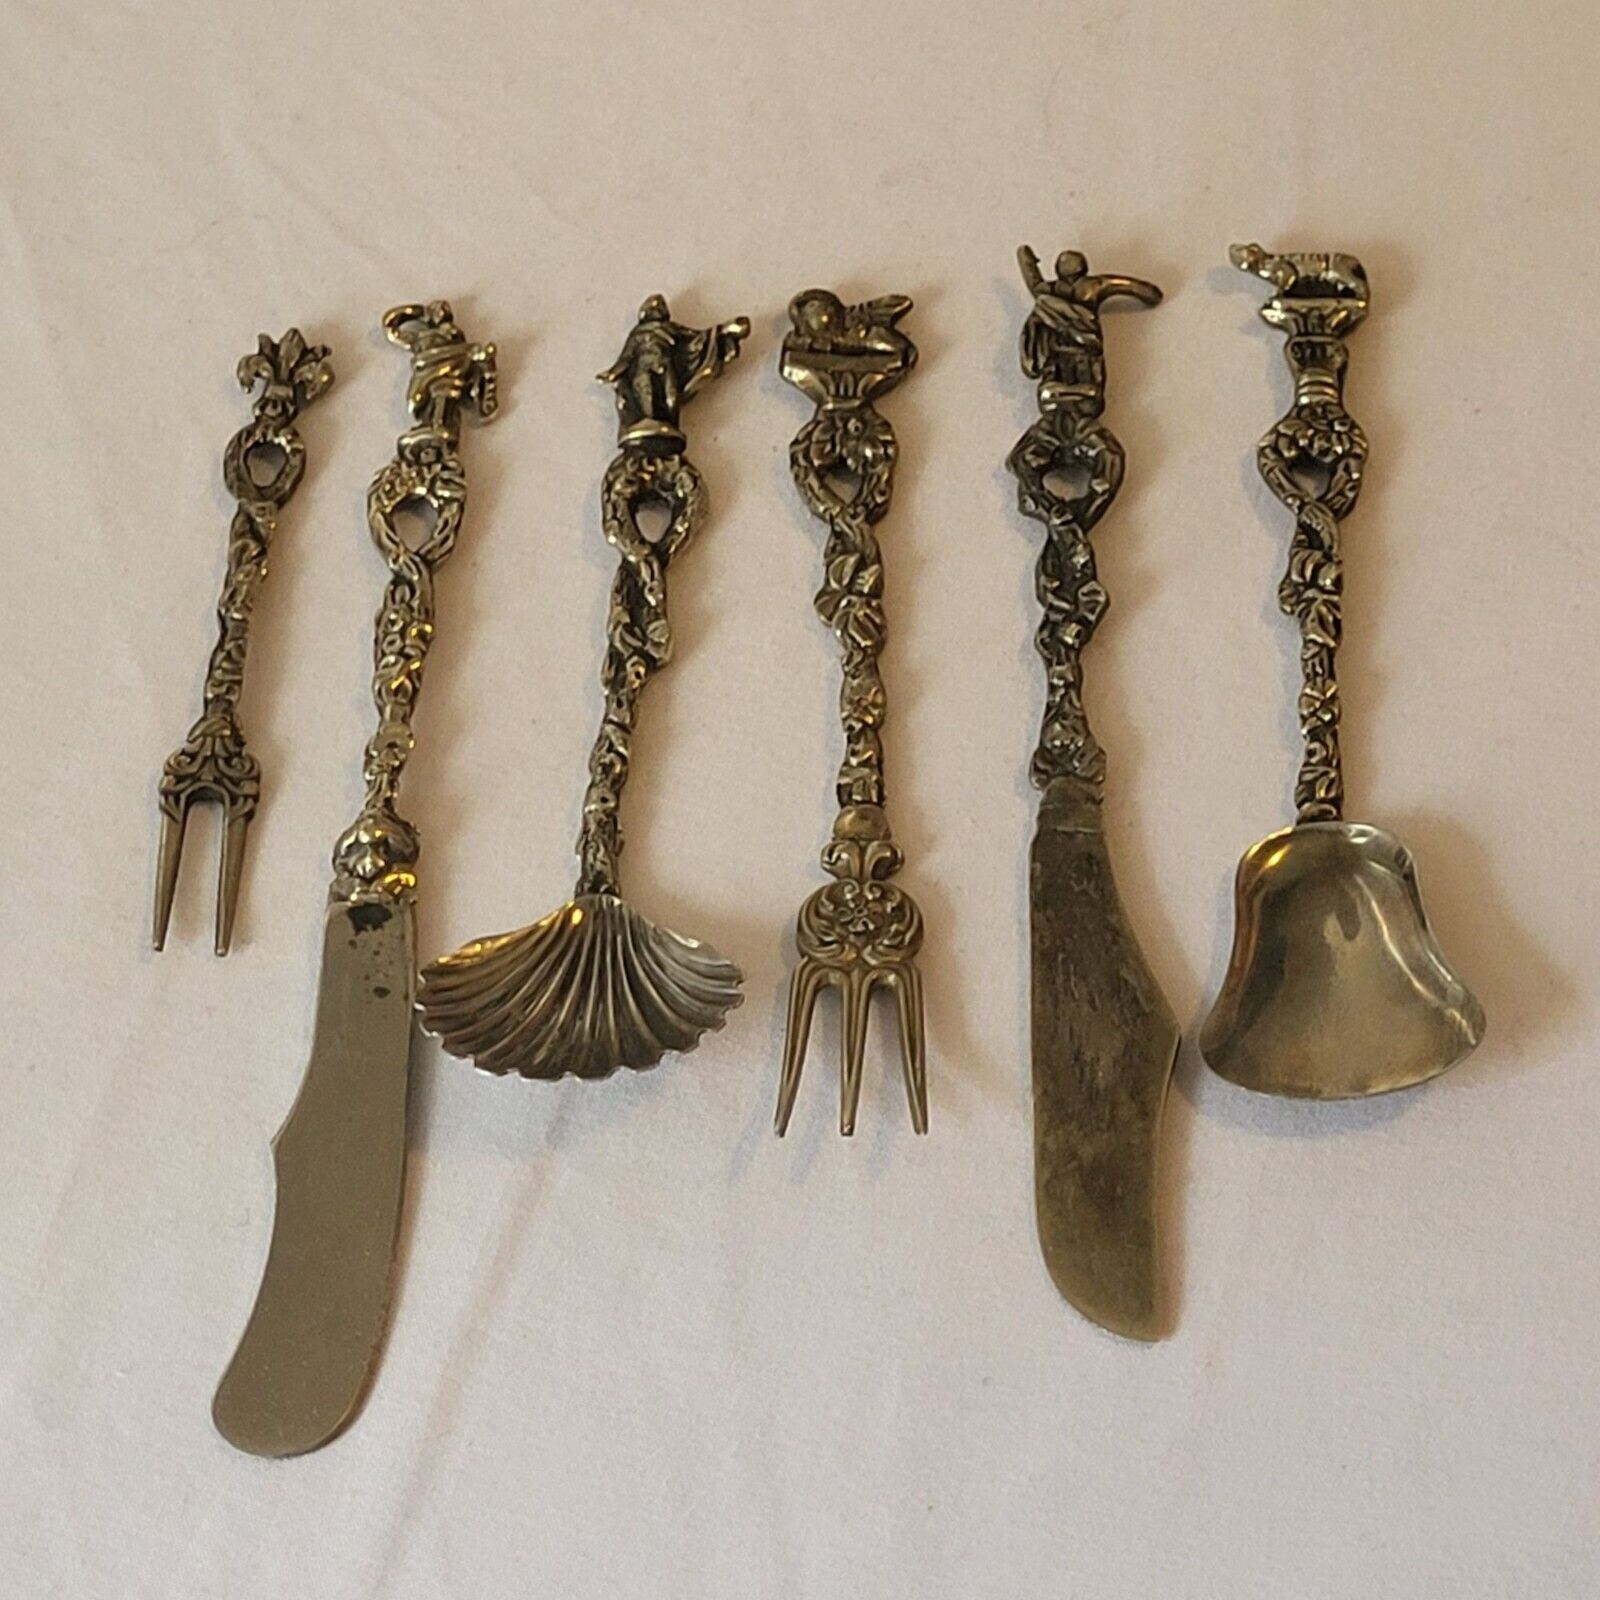 Vintage Artisan Italian Silver Plated Hors D'oeuvres Forks & Knives Set Italy